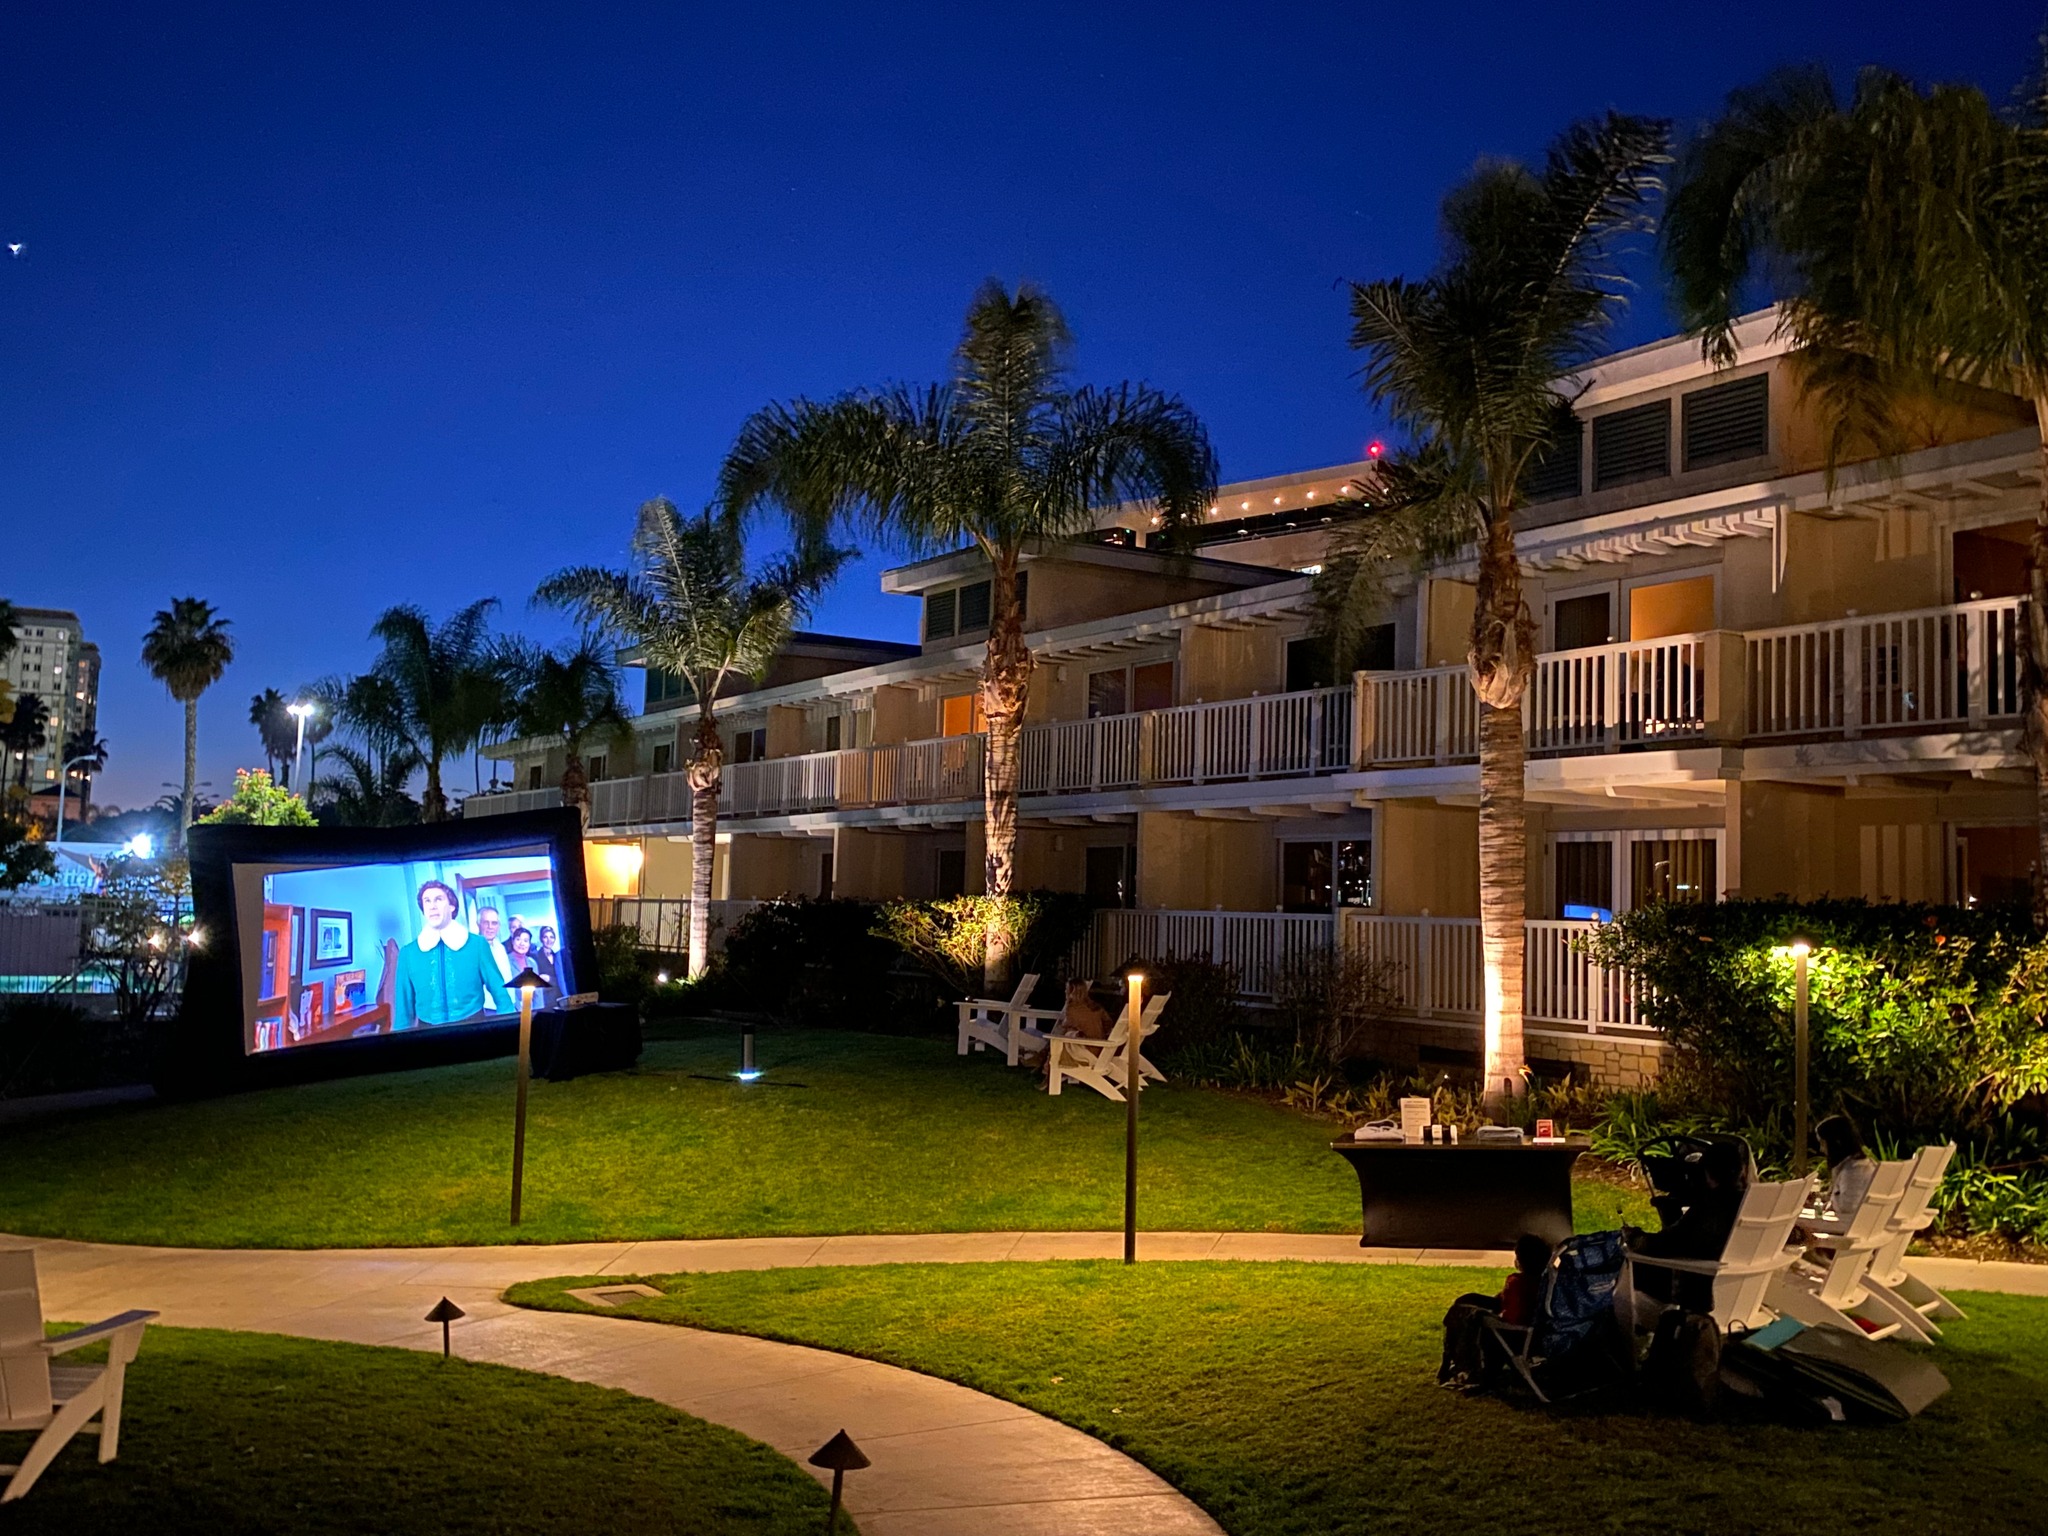 Movie screen outdoors on lawn for outdoor movie night